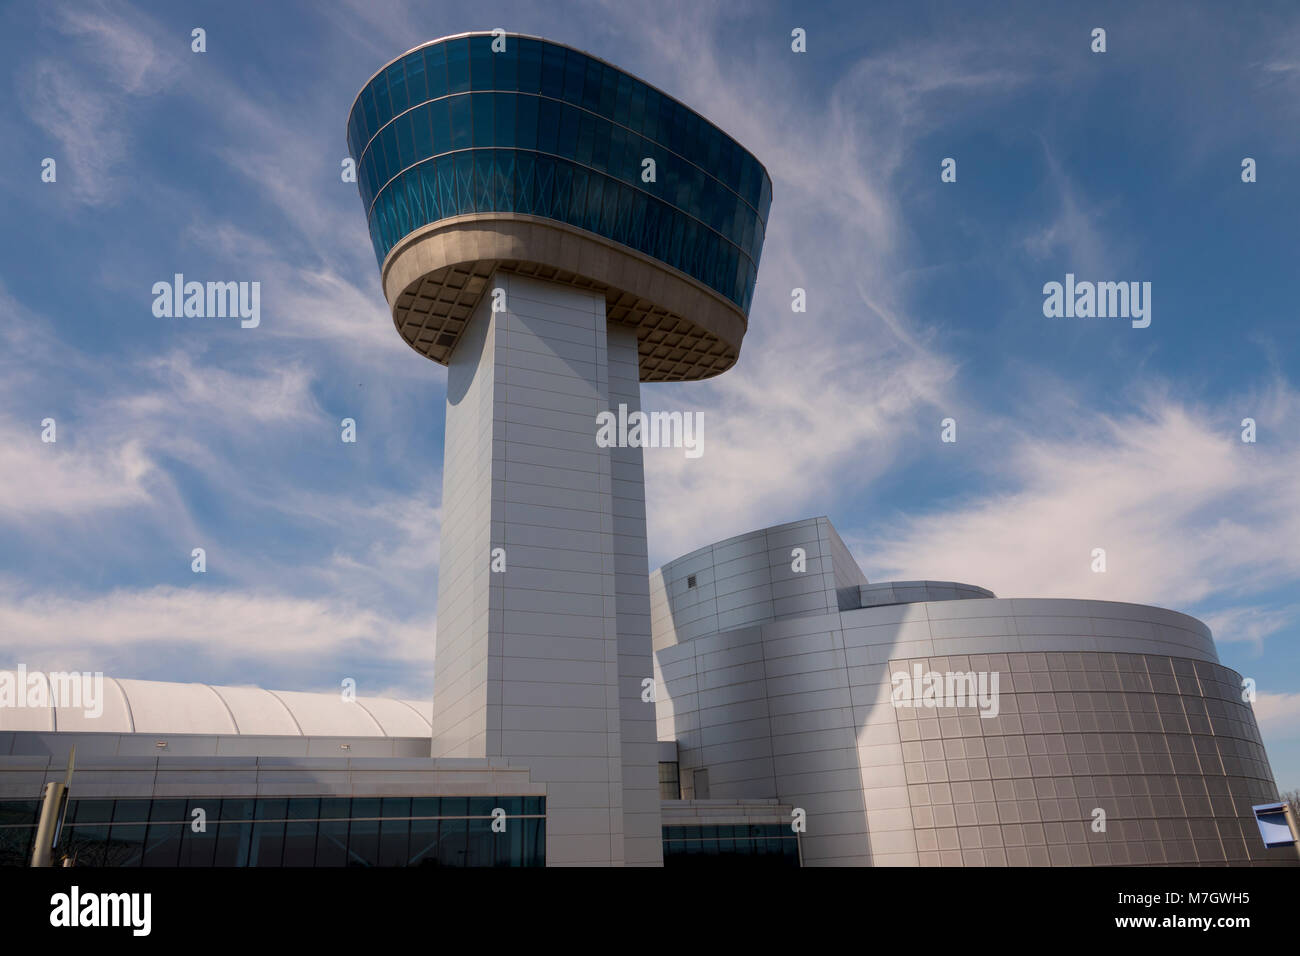 Steven F Udvar Hazy Center  Smithsonian Air and Space museum at Dulles Airport Chantilly Virginia exterior Stock Photo